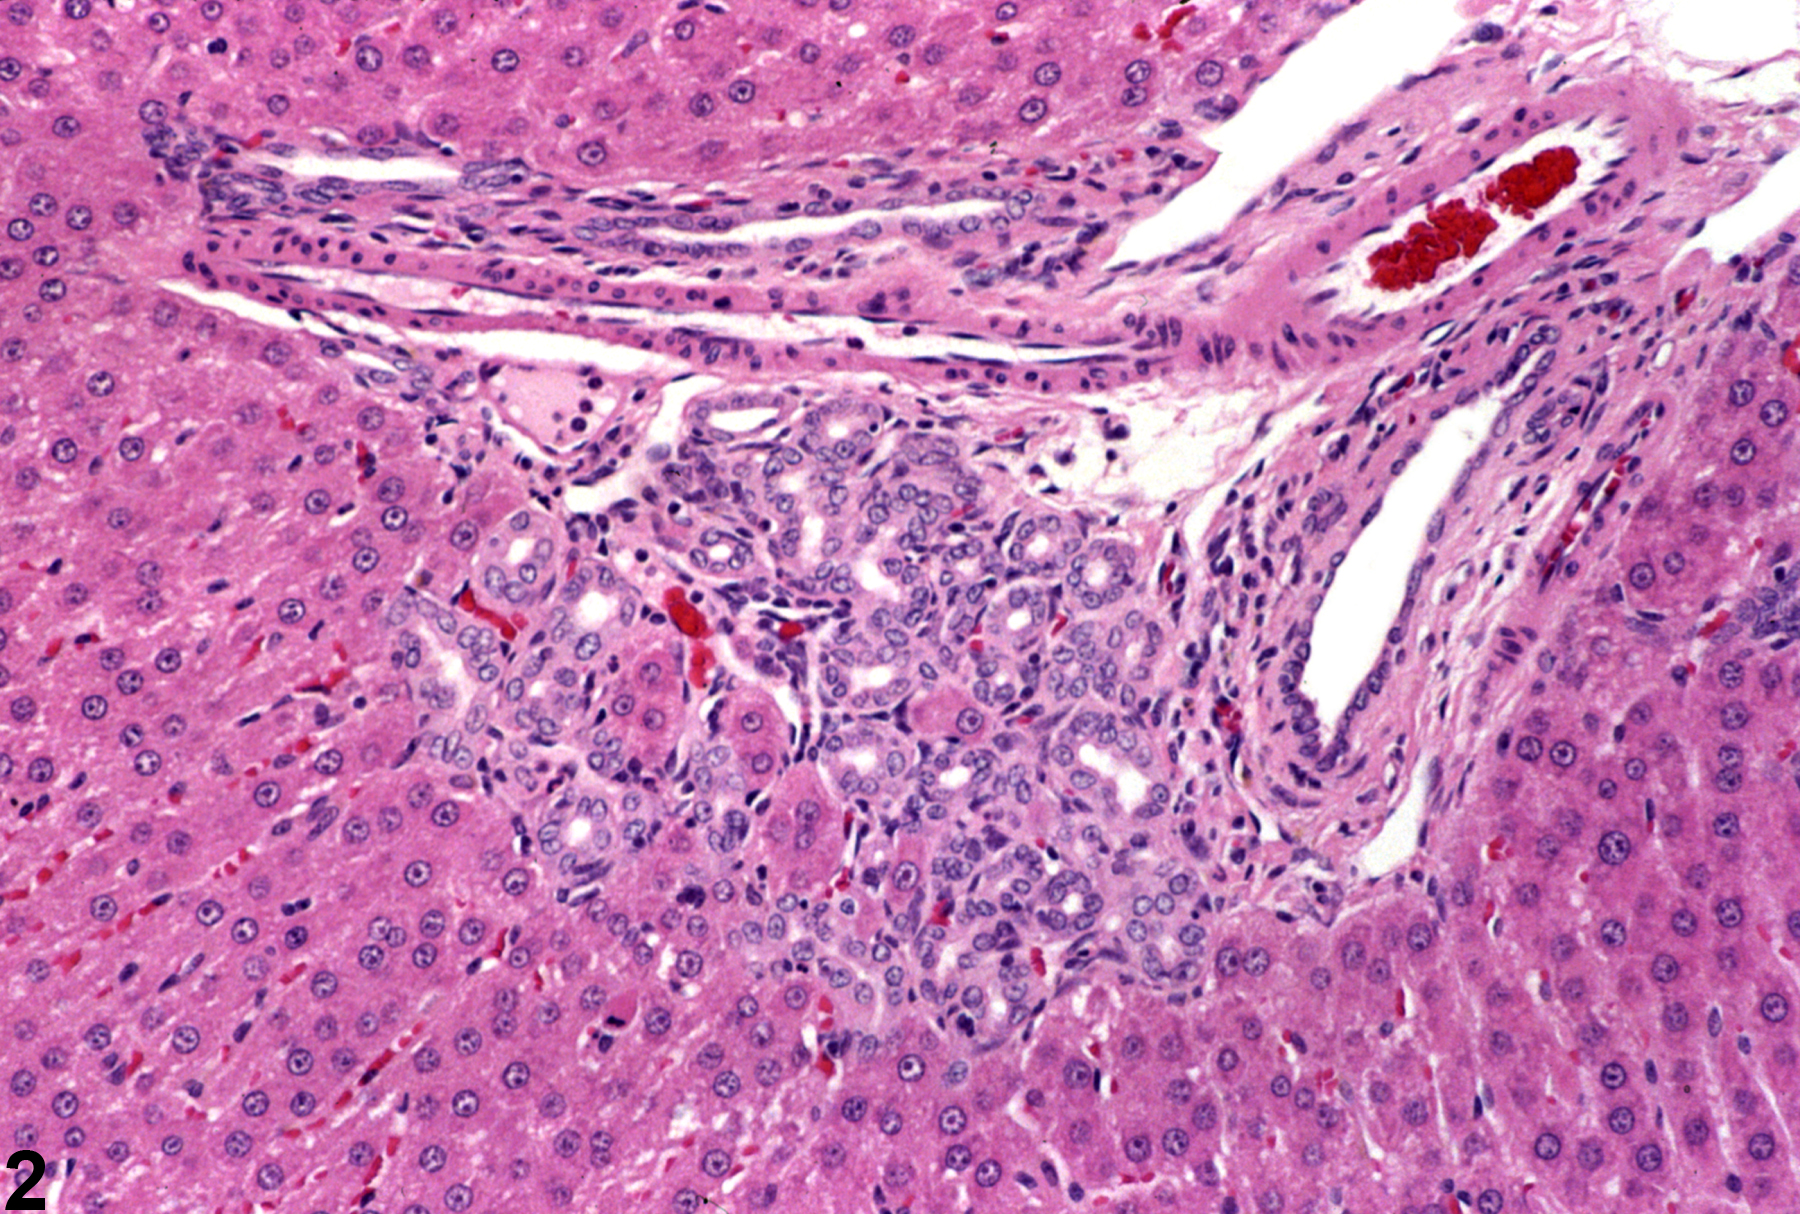 Image of hyperplasia in the liver bile duct from a female F344/N rat in a subchronic study